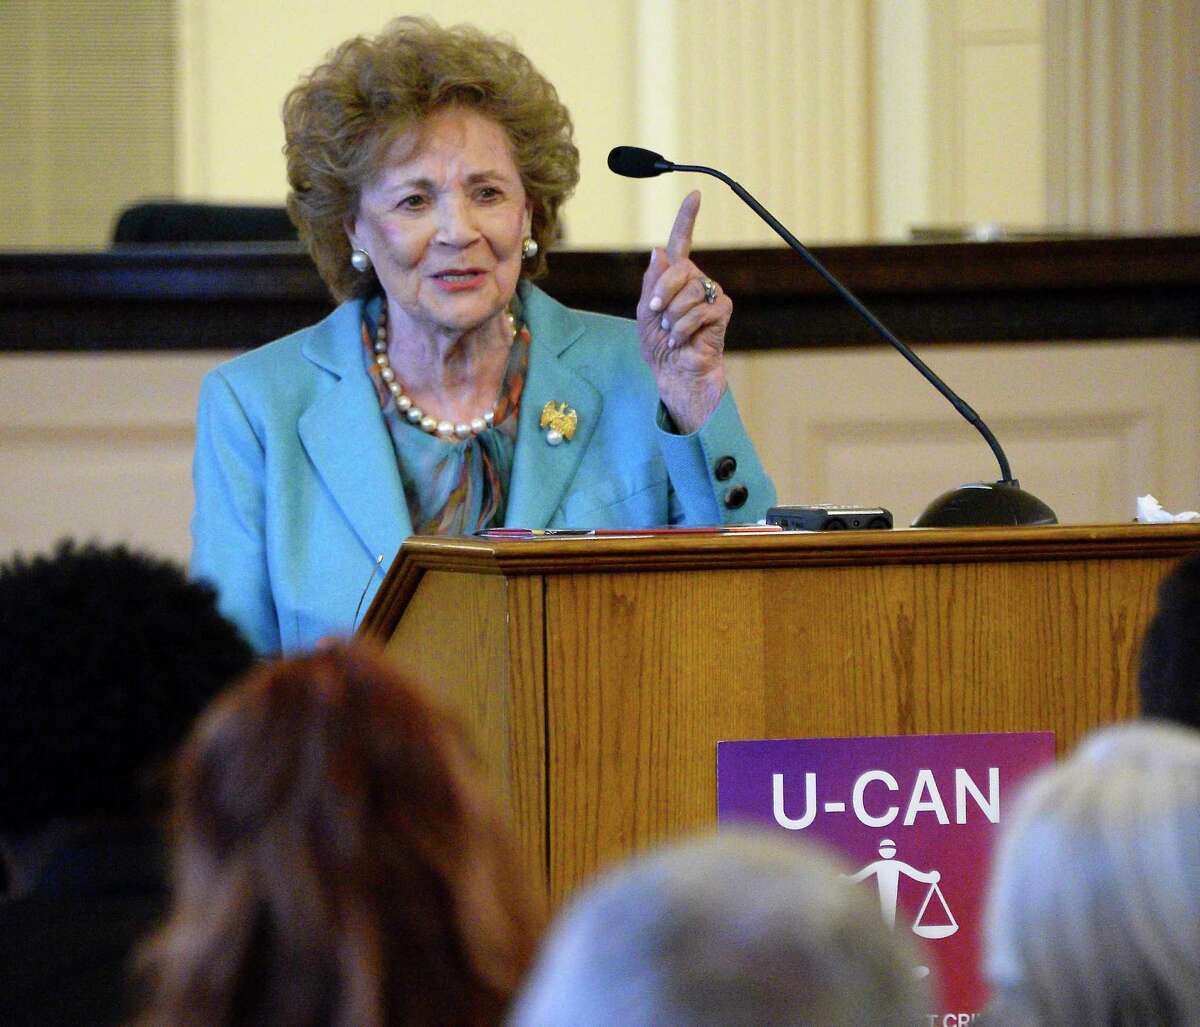 Former First Lady and founder of Mentoring USA, Matilda Cuomo, delivers the inaugural commencement remarks for the first graduation ceremony of the United Against Crime-Community Action Network (U-CAN), a court-based mentoring program Tuesday Sept. 25, 2018 in Albany, NY. (John Carl D'Annibale/Times Union)